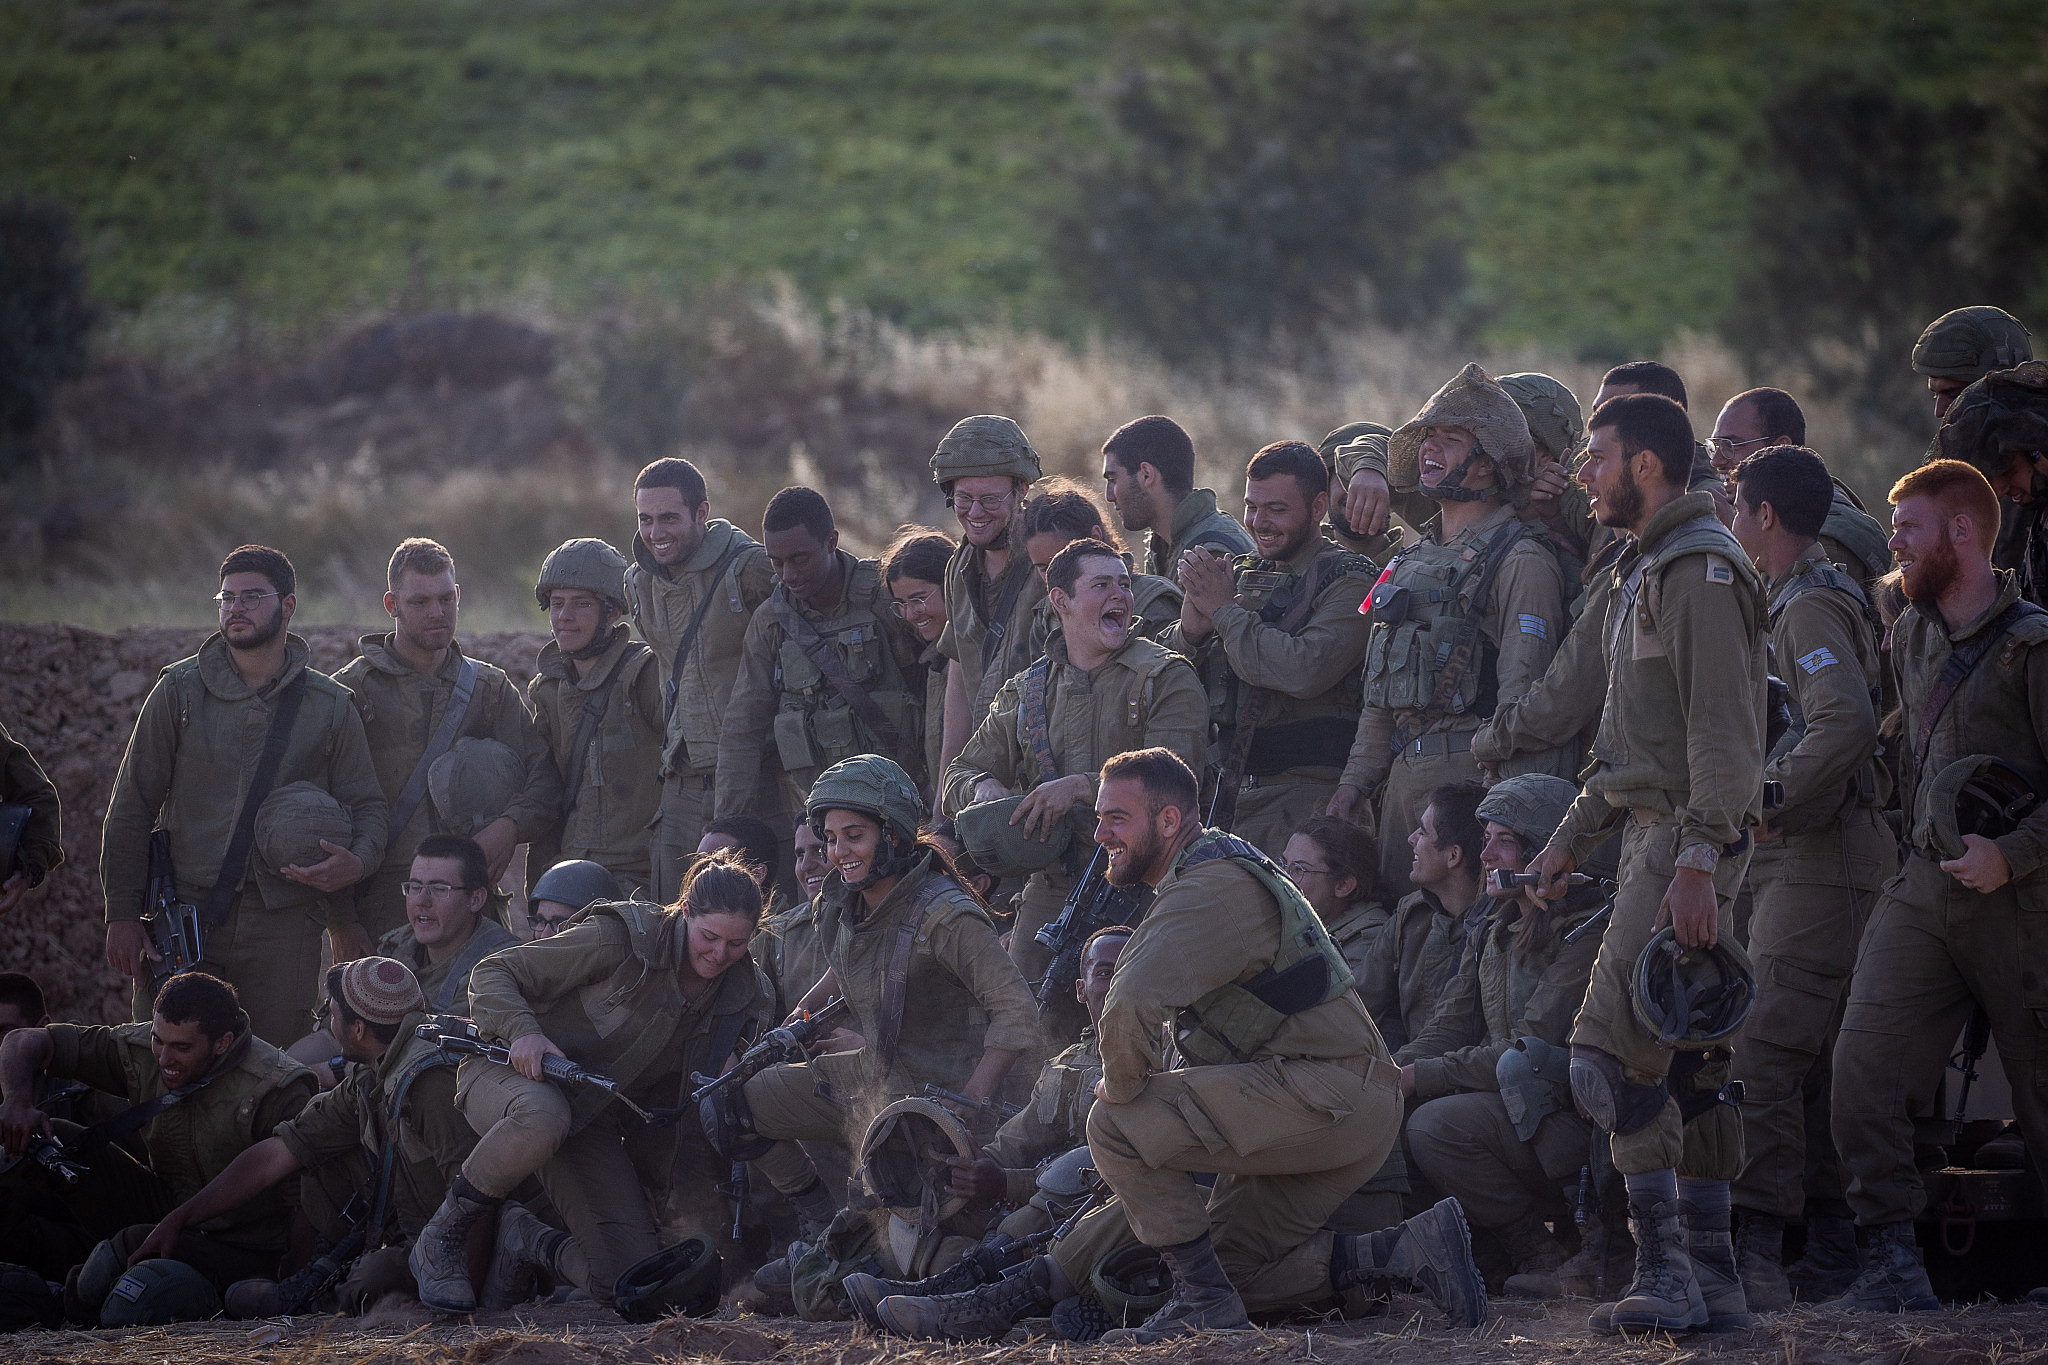 Israeli soldiers from the IDF Artillery Corps seen at a staging area near the Israeli border with Gaza on May 17, 2021. (Yonatan Sindel/Flash90)